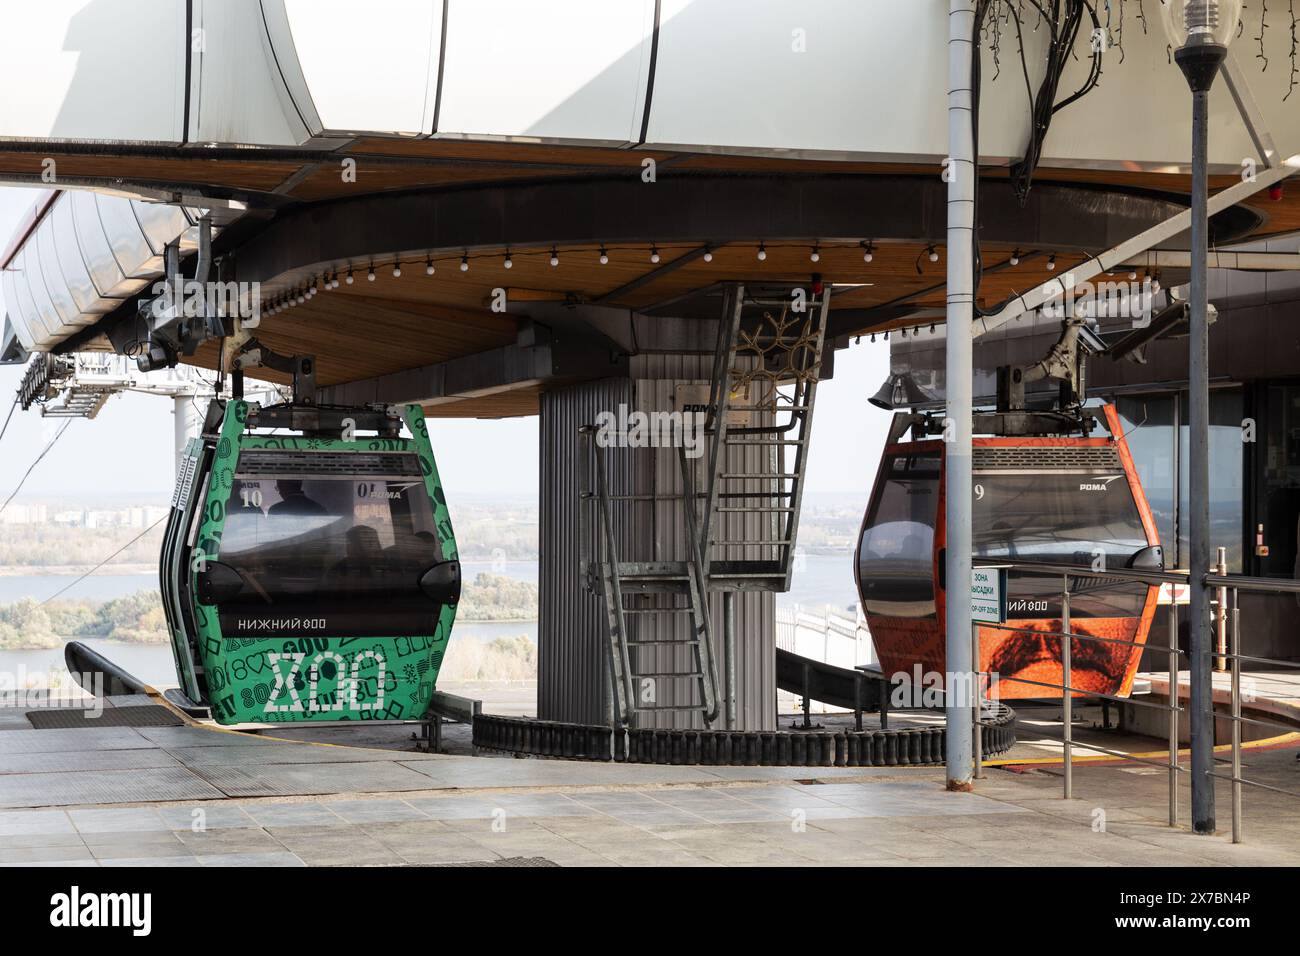 Nizhny Novgorod, Russia - October 01, 2023: Cableway station. Two gondolas in the passenger boarding and disembarking area Stock Photo